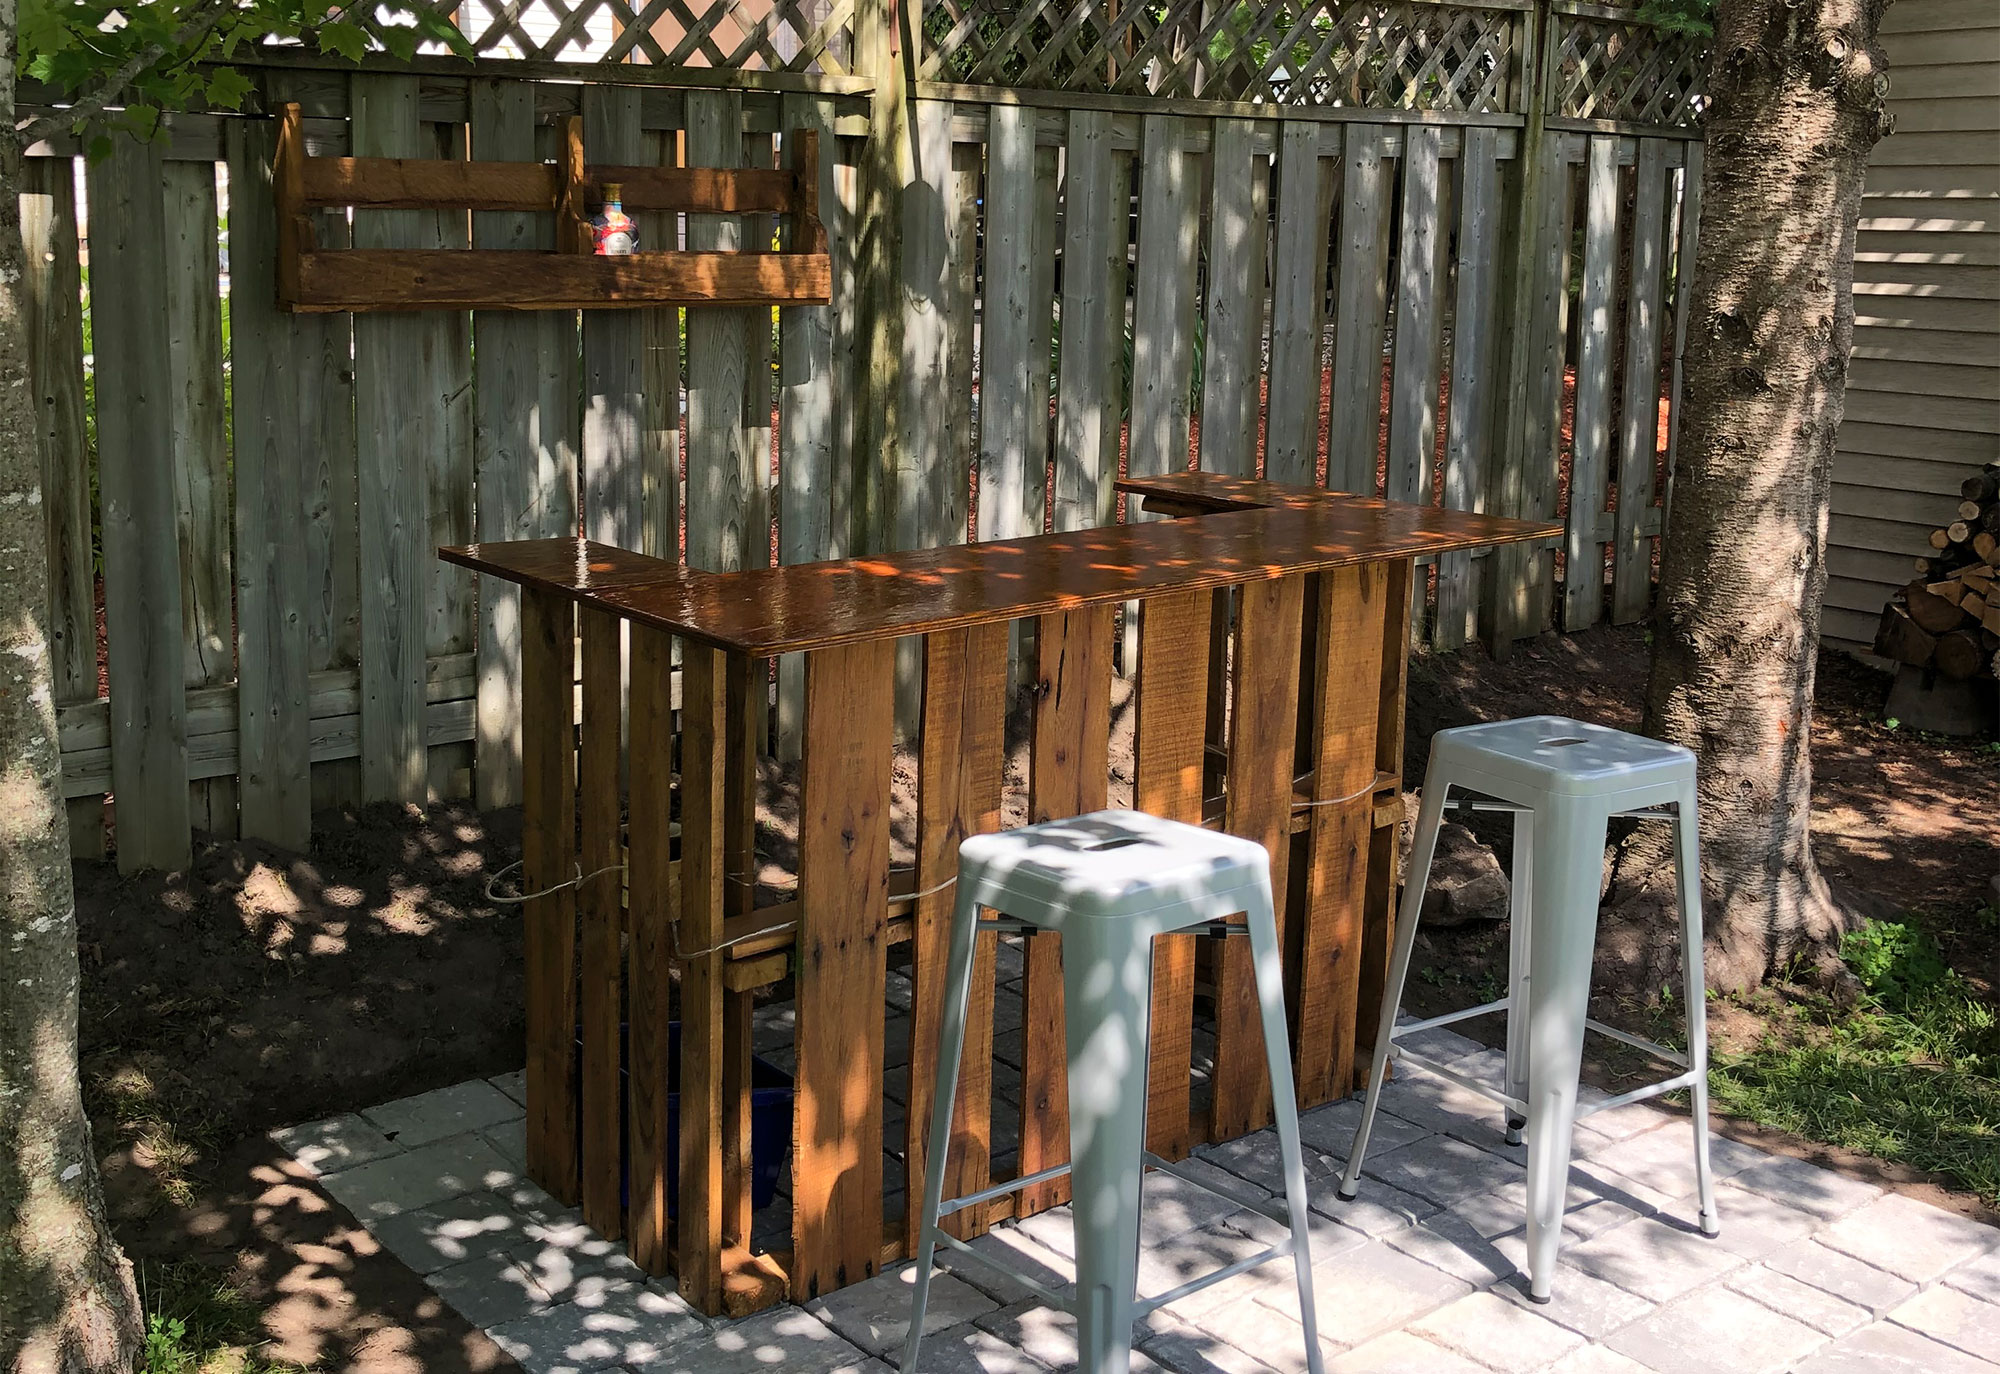 Make a Backyard Bar Using Pallets. Backyard bar made out of pallets with two bar stools in front of it.